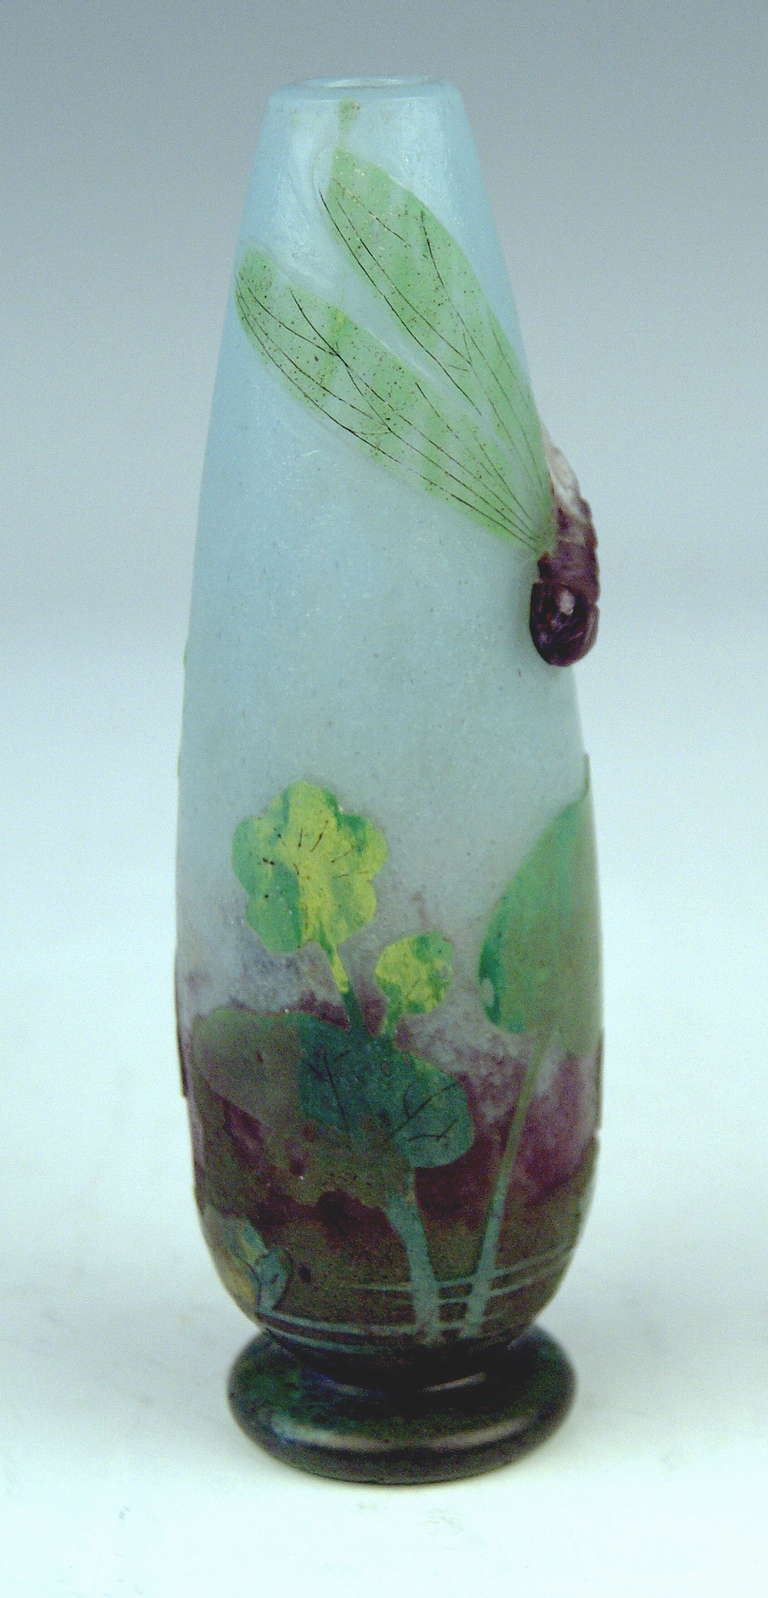 Daum Nancy Vase called Libellules et Renoncules Jaunes (Art Nouveau), made in France / Lorraine, circa 1904
 Stunningly manufactured casing glass:  With  milky bluish opalescent powder meltings at top area as well as at middle area  /  the powder